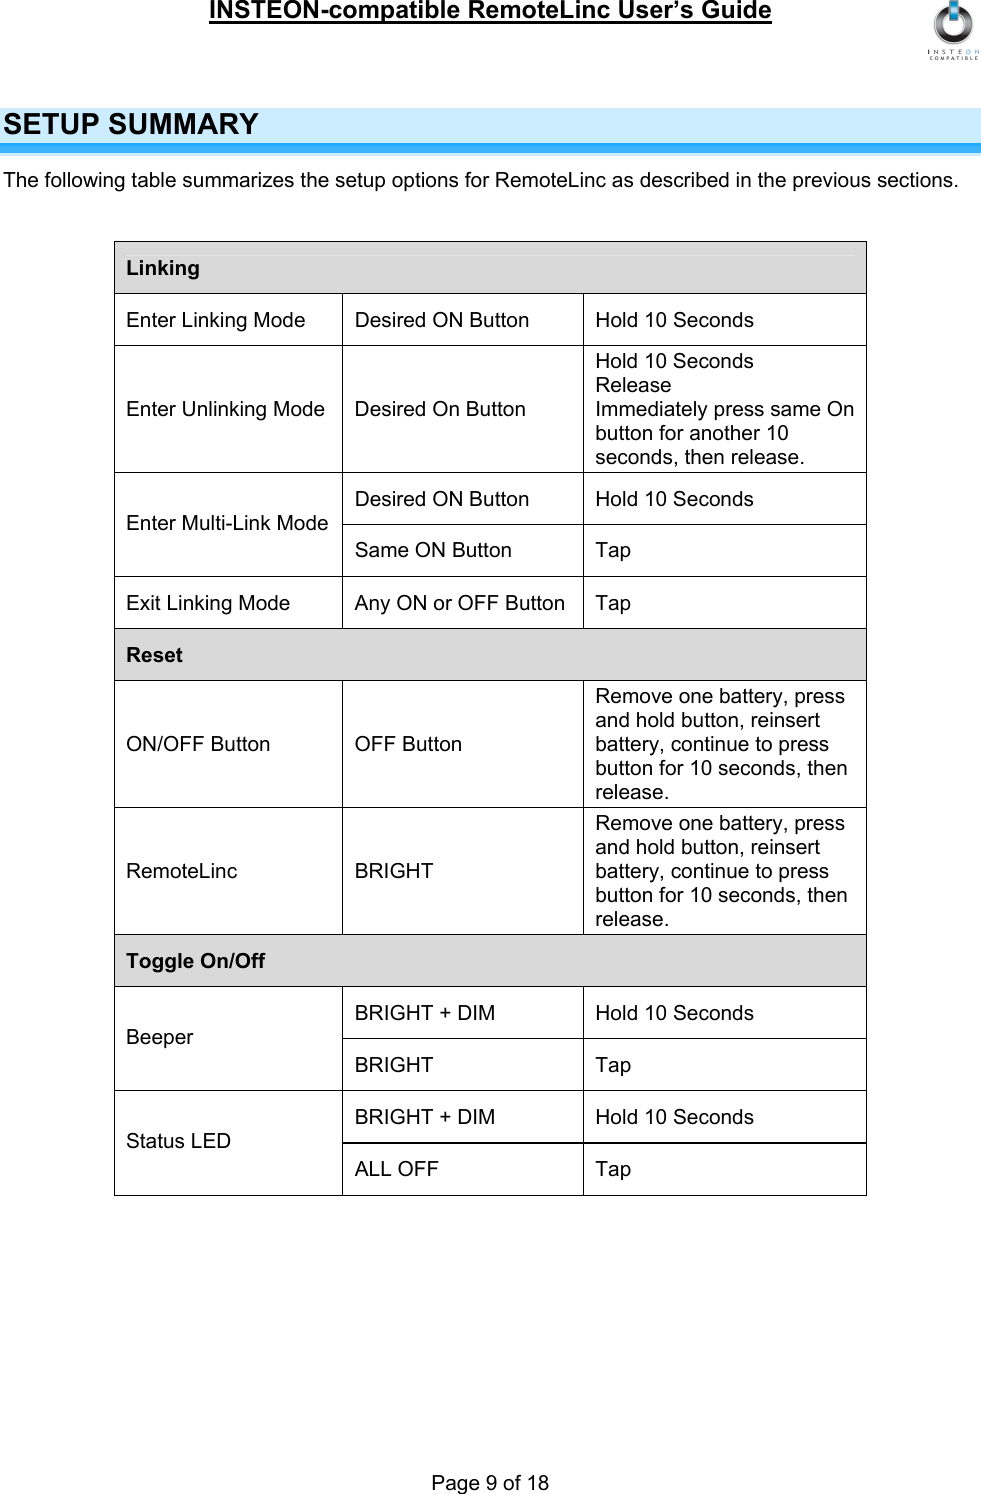 INSTEON-compatible RemoteLinc User’s Guide Page 9 of 18 SETUP SUMMARY The following table summarizes the setup options for RemoteLinc as described in the previous sections.  Linking Enter Linking Mode  Desired ON Button  Hold 10 Seconds Enter Unlinking Mode  Desired On Button Hold 10 Seconds Release Immediately press same On button for another 10 seconds, then release. Desired ON Button  Hold 10 Seconds Enter Multi-Link Mode Same ON Button  Tap Exit Linking Mode  Any ON or OFF Button  Tap Reset ON/OFF Button   OFF Button Remove one battery, press and hold button, reinsert battery, continue to press button for 10 seconds, then release. RemoteLinc BRIGHT Remove one battery, press and hold button, reinsert battery, continue to press button for 10 seconds, then release. Toggle On/Off BRIGHT + DIM  Hold 10 Seconds Beeper BRIGHT Tap BRIGHT + DIM  Hold 10 Seconds Status LED ALL OFF  Tap   